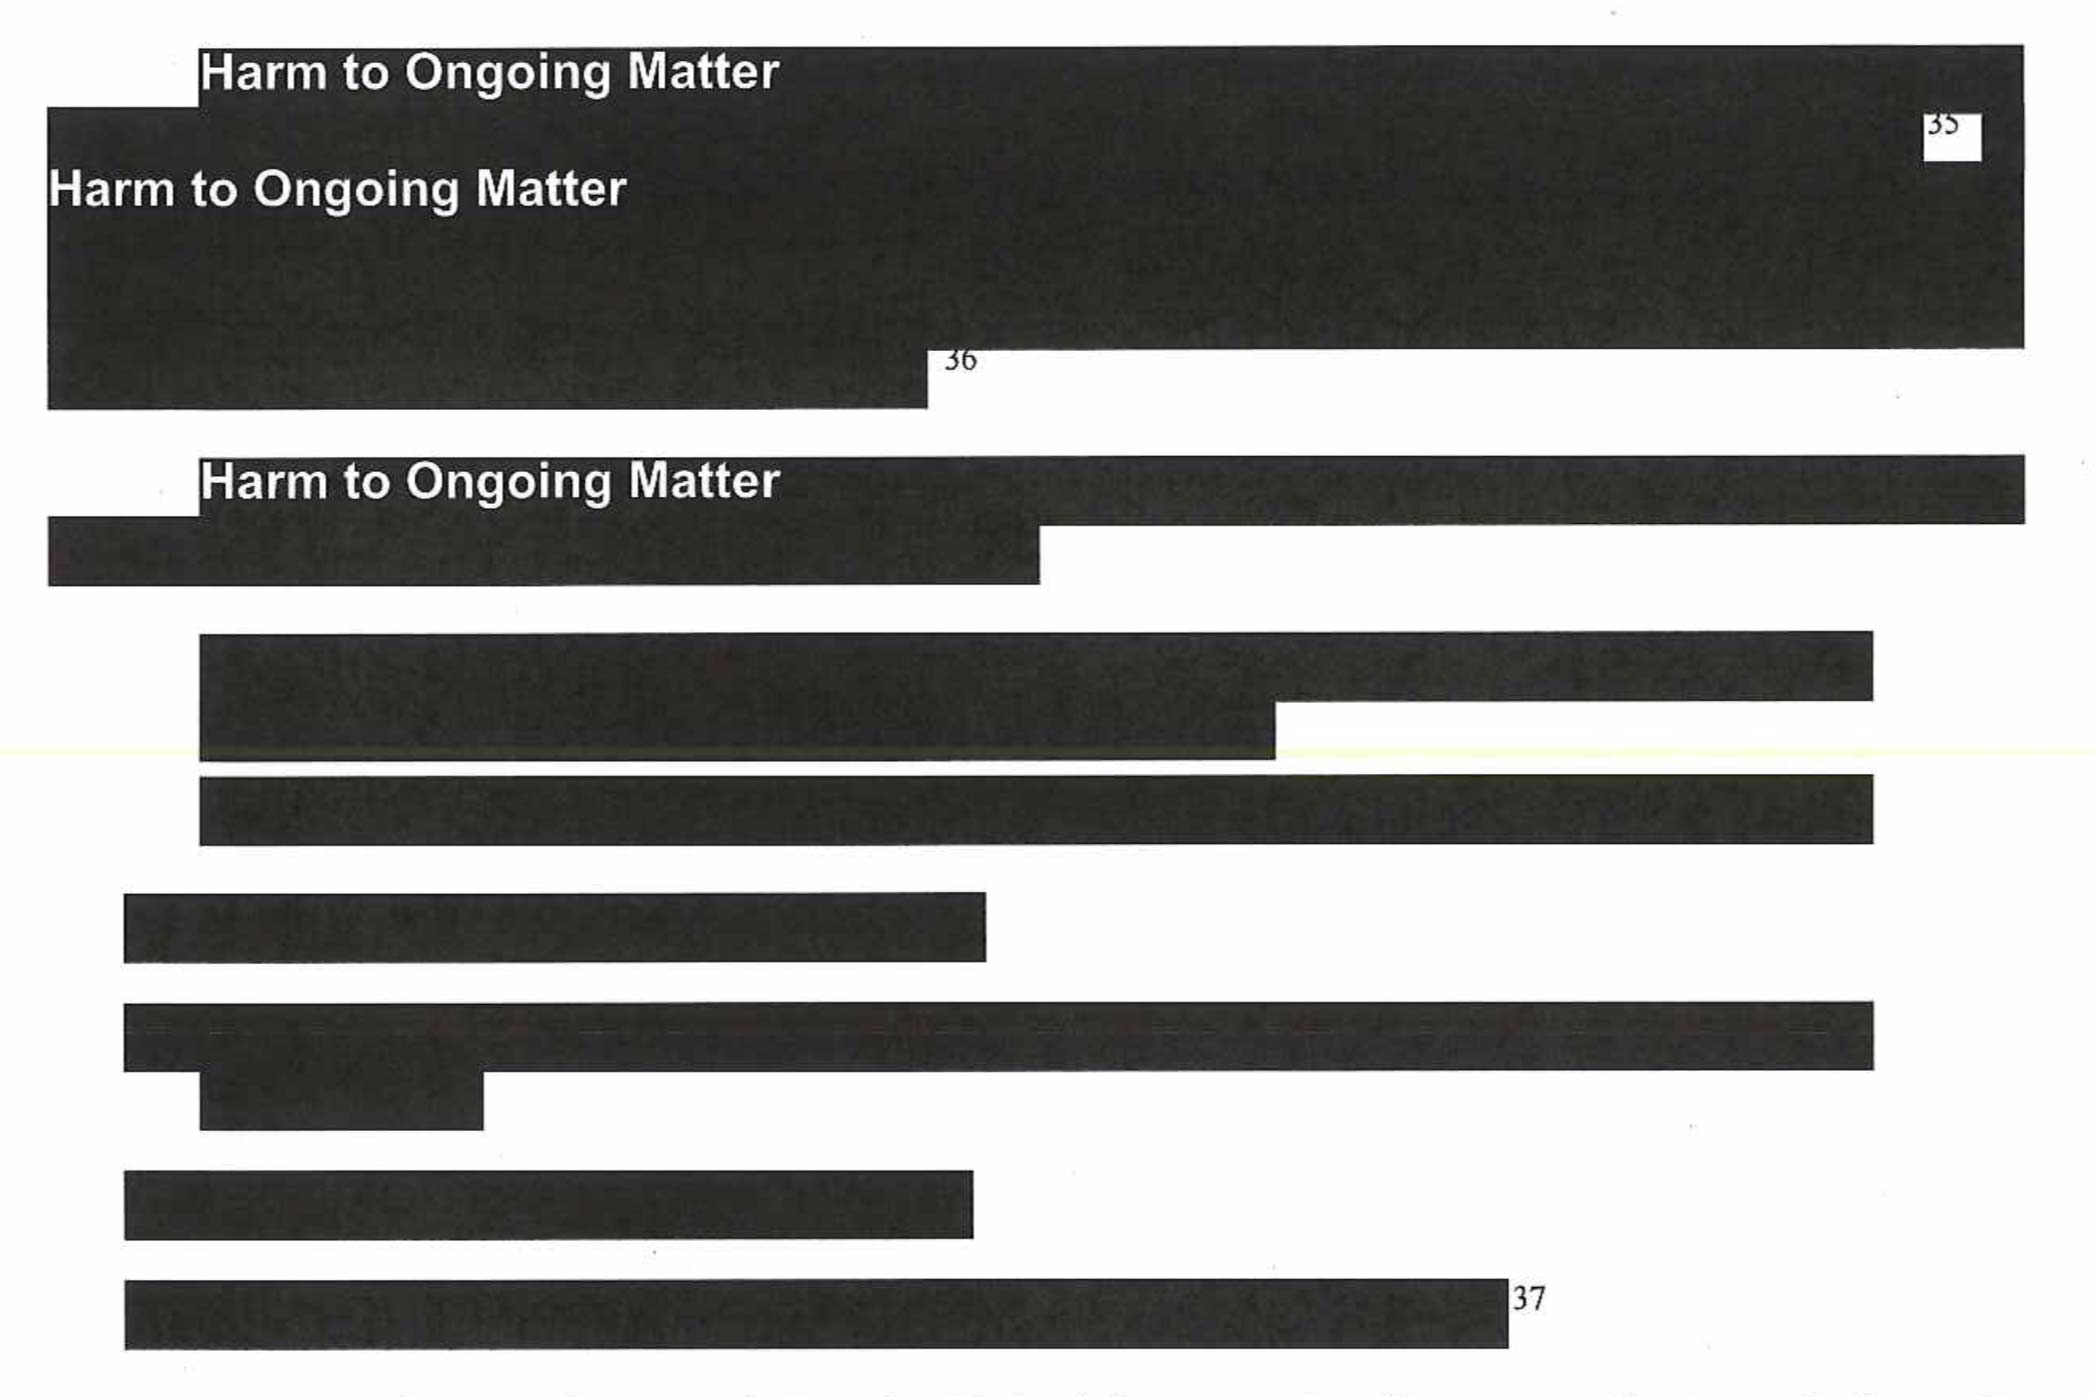 types of redacted information in meuller report